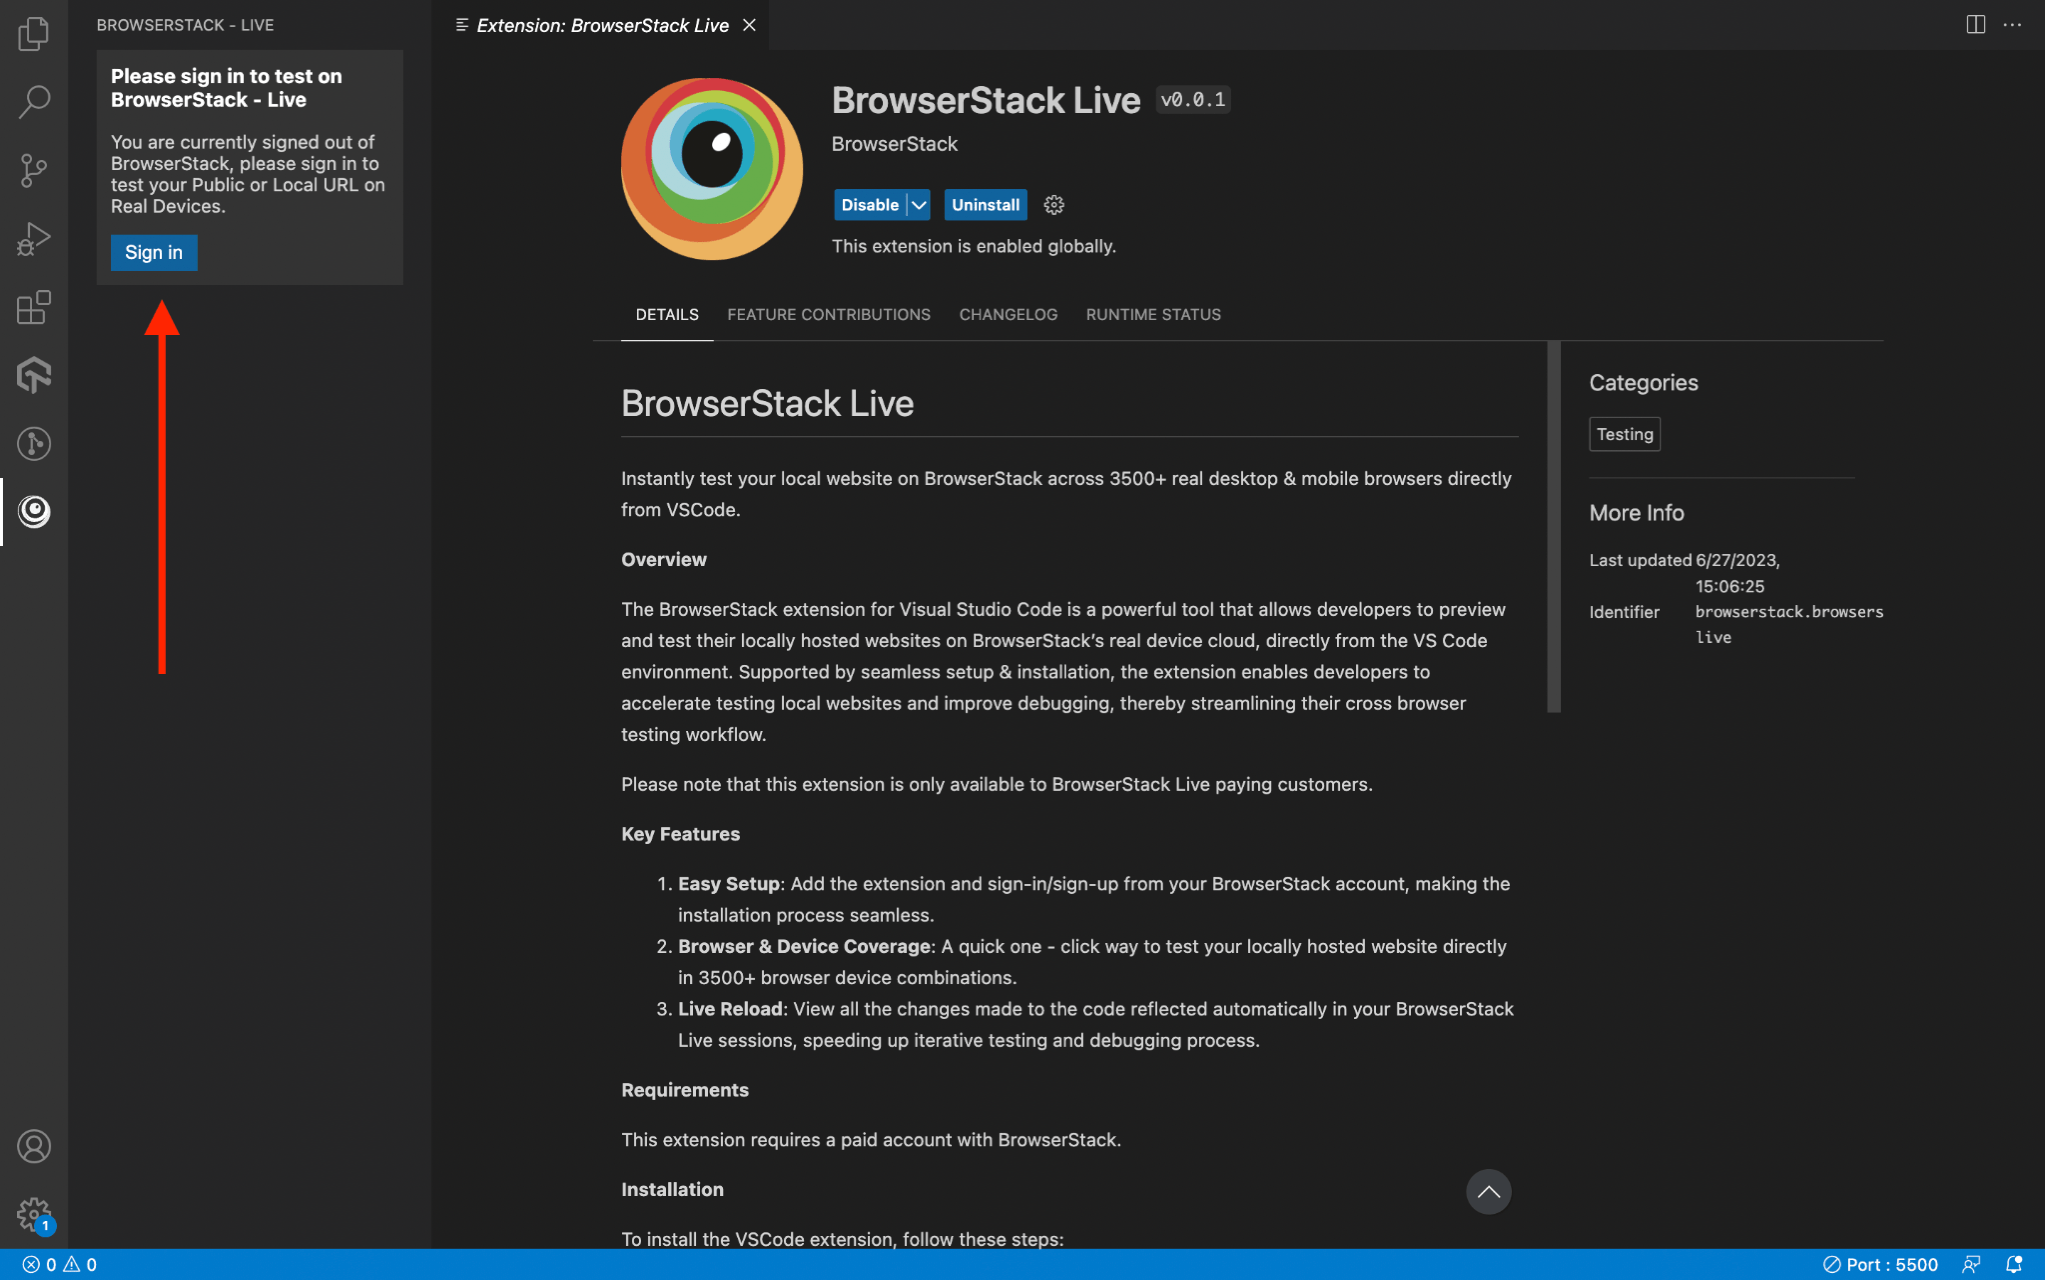 Sign-in to BrowserStack from Visual Studio Code